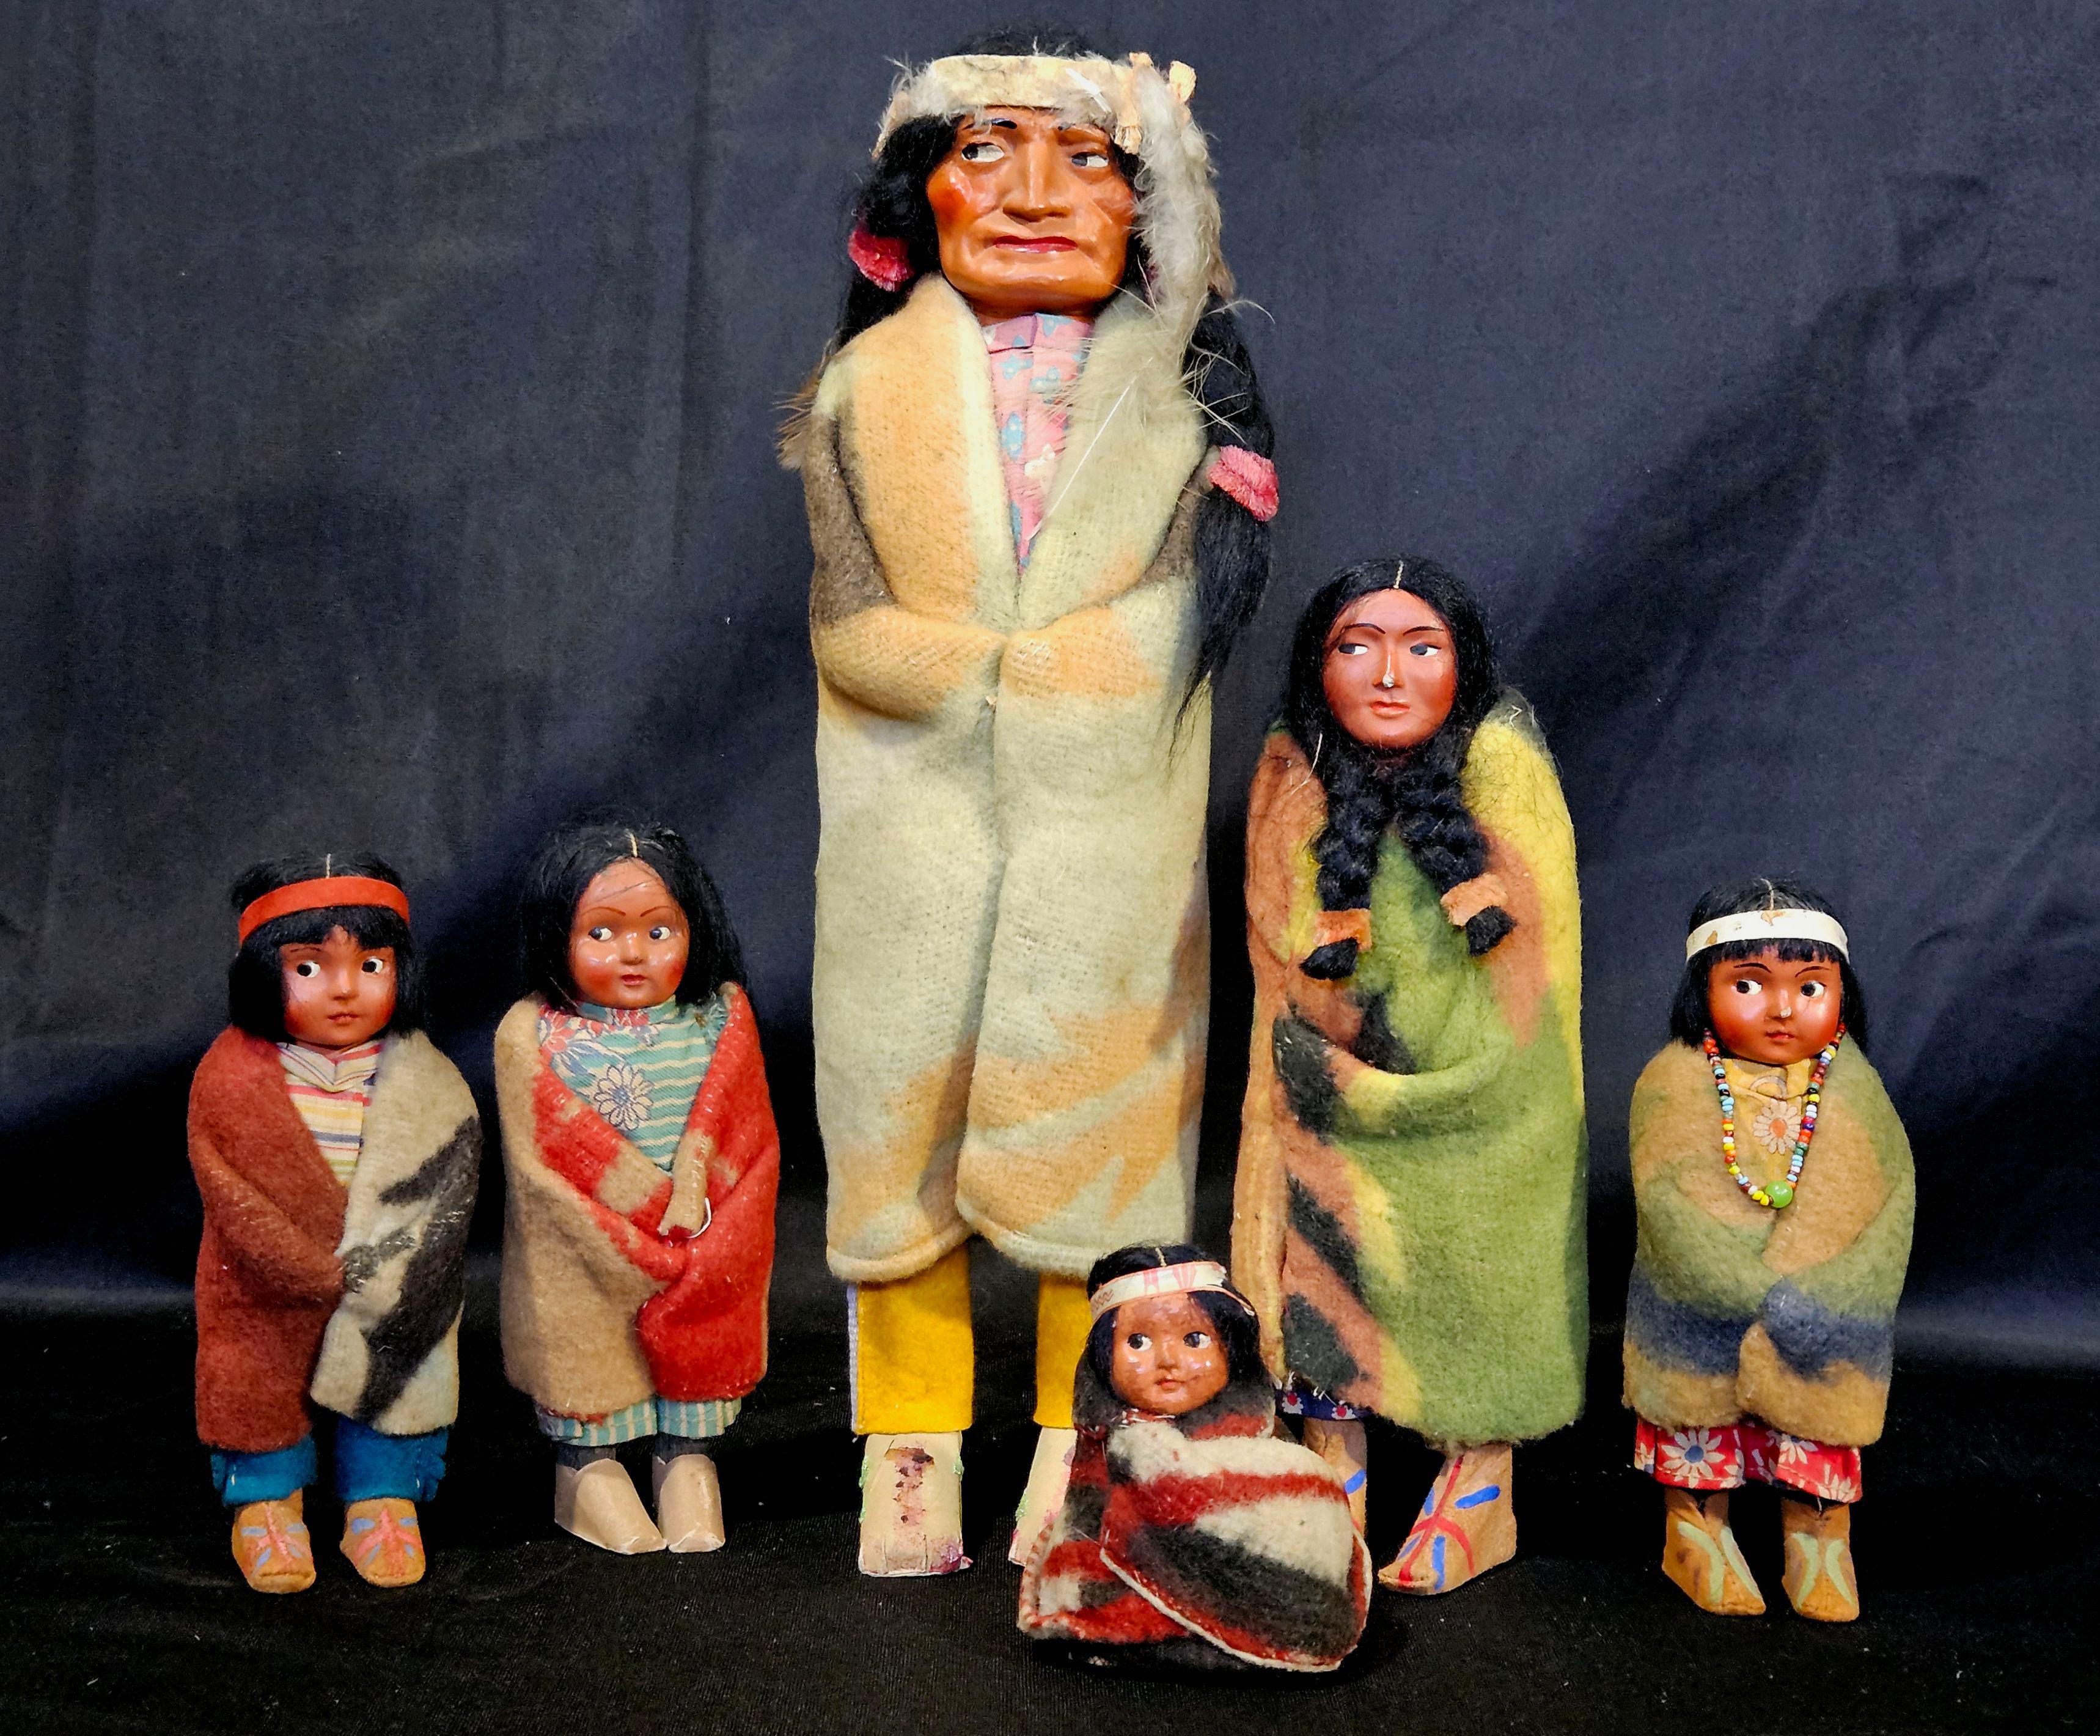 A Skookum doll was a Native American-themed doll, sold as a souvenir item in the early 20th century.
They are all in different sizes. The last photo shows the dimensions (inch) of each doll, W (width) x H (height) x D (depth).
The original labels